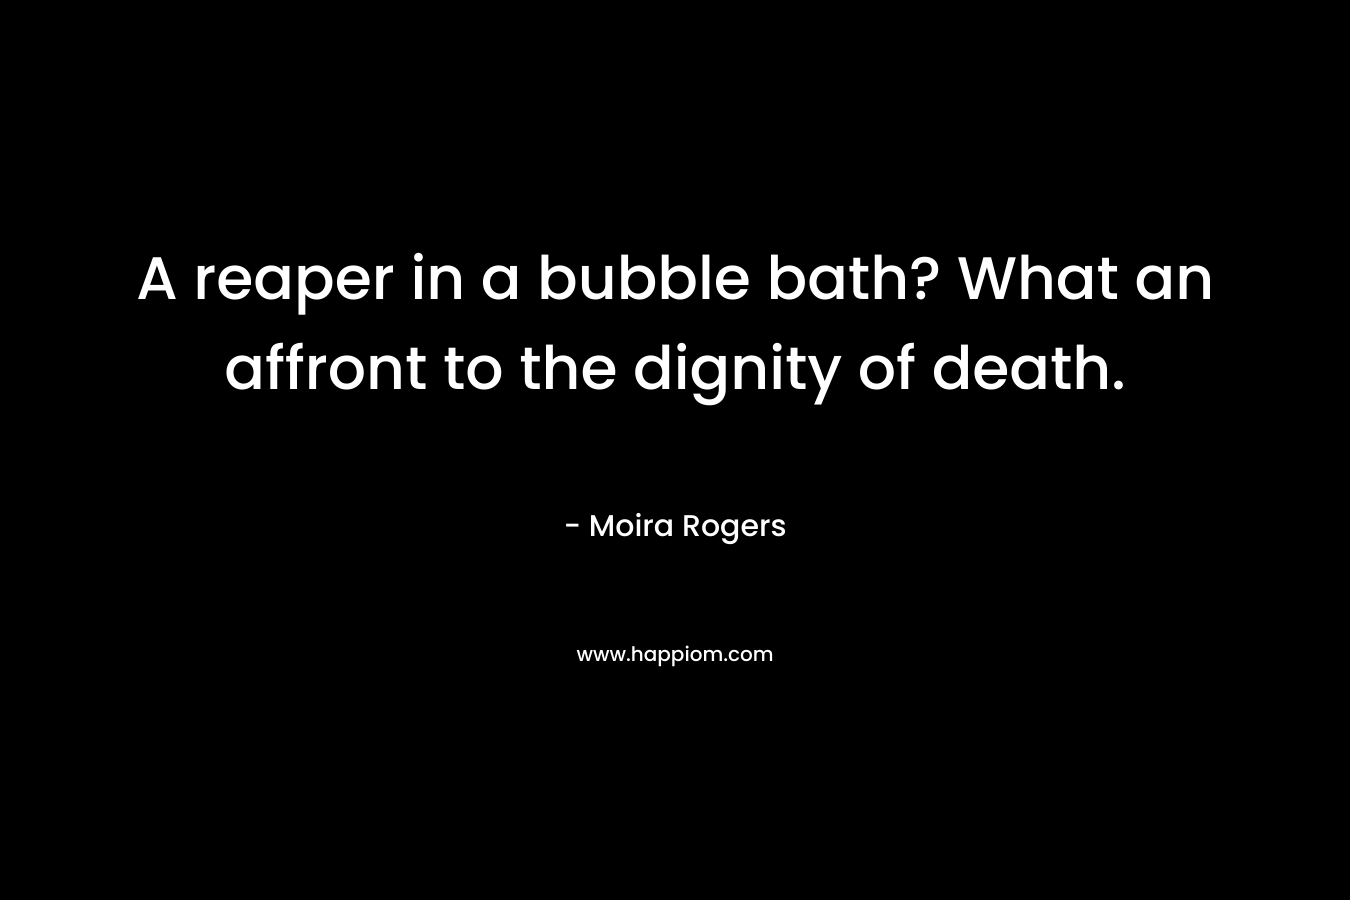 A reaper in a bubble bath? What an affront to the dignity of death.